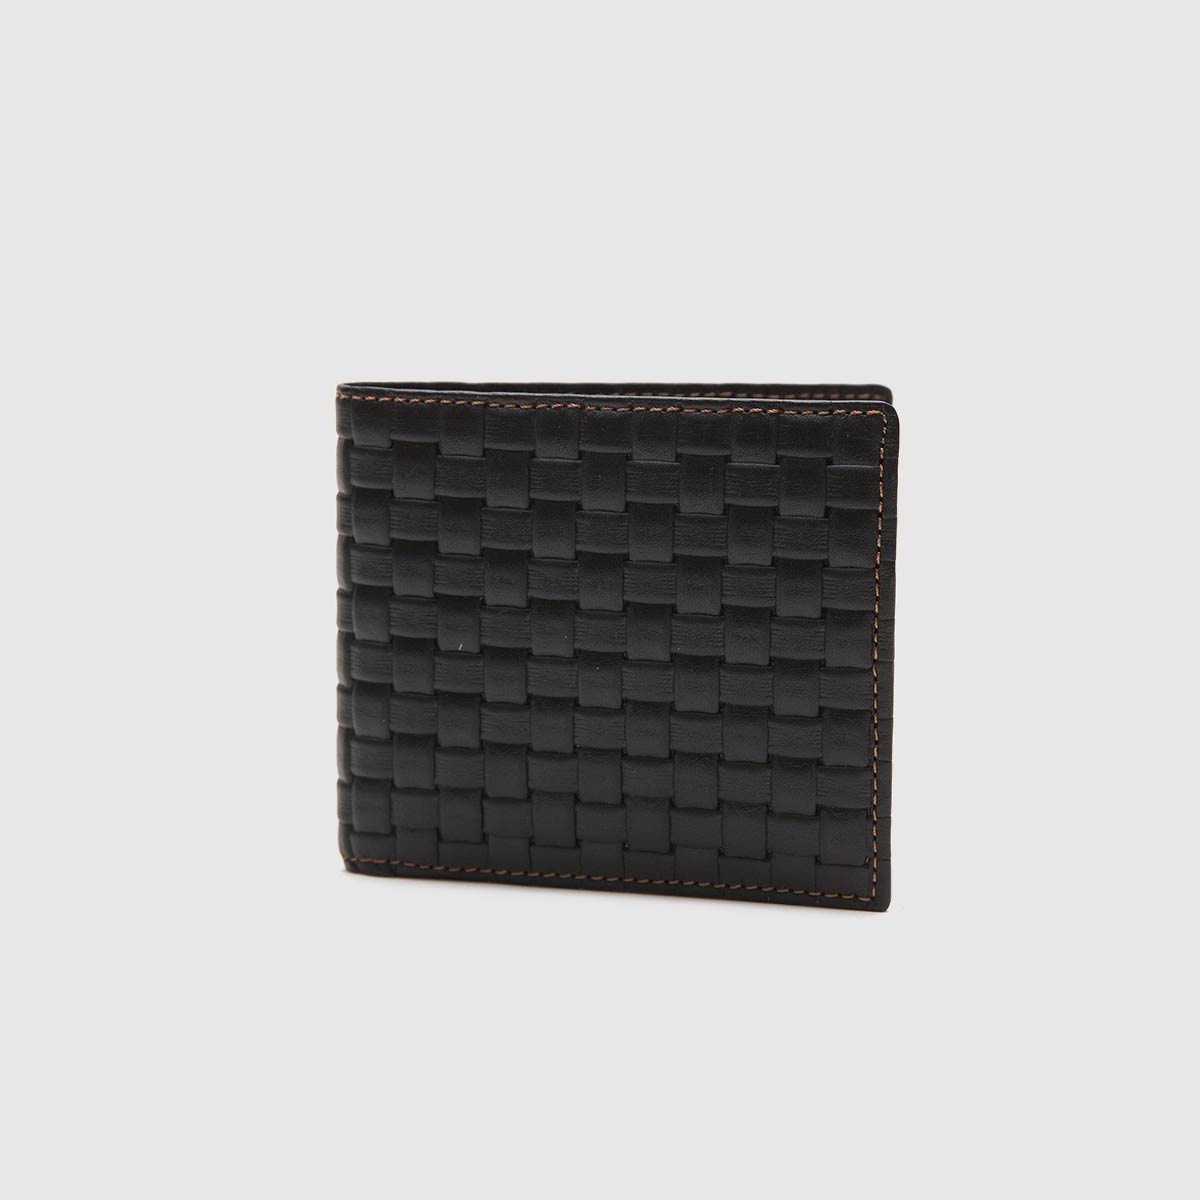 Black leather wallet with woven print Davide Albertario on sale 2022 4